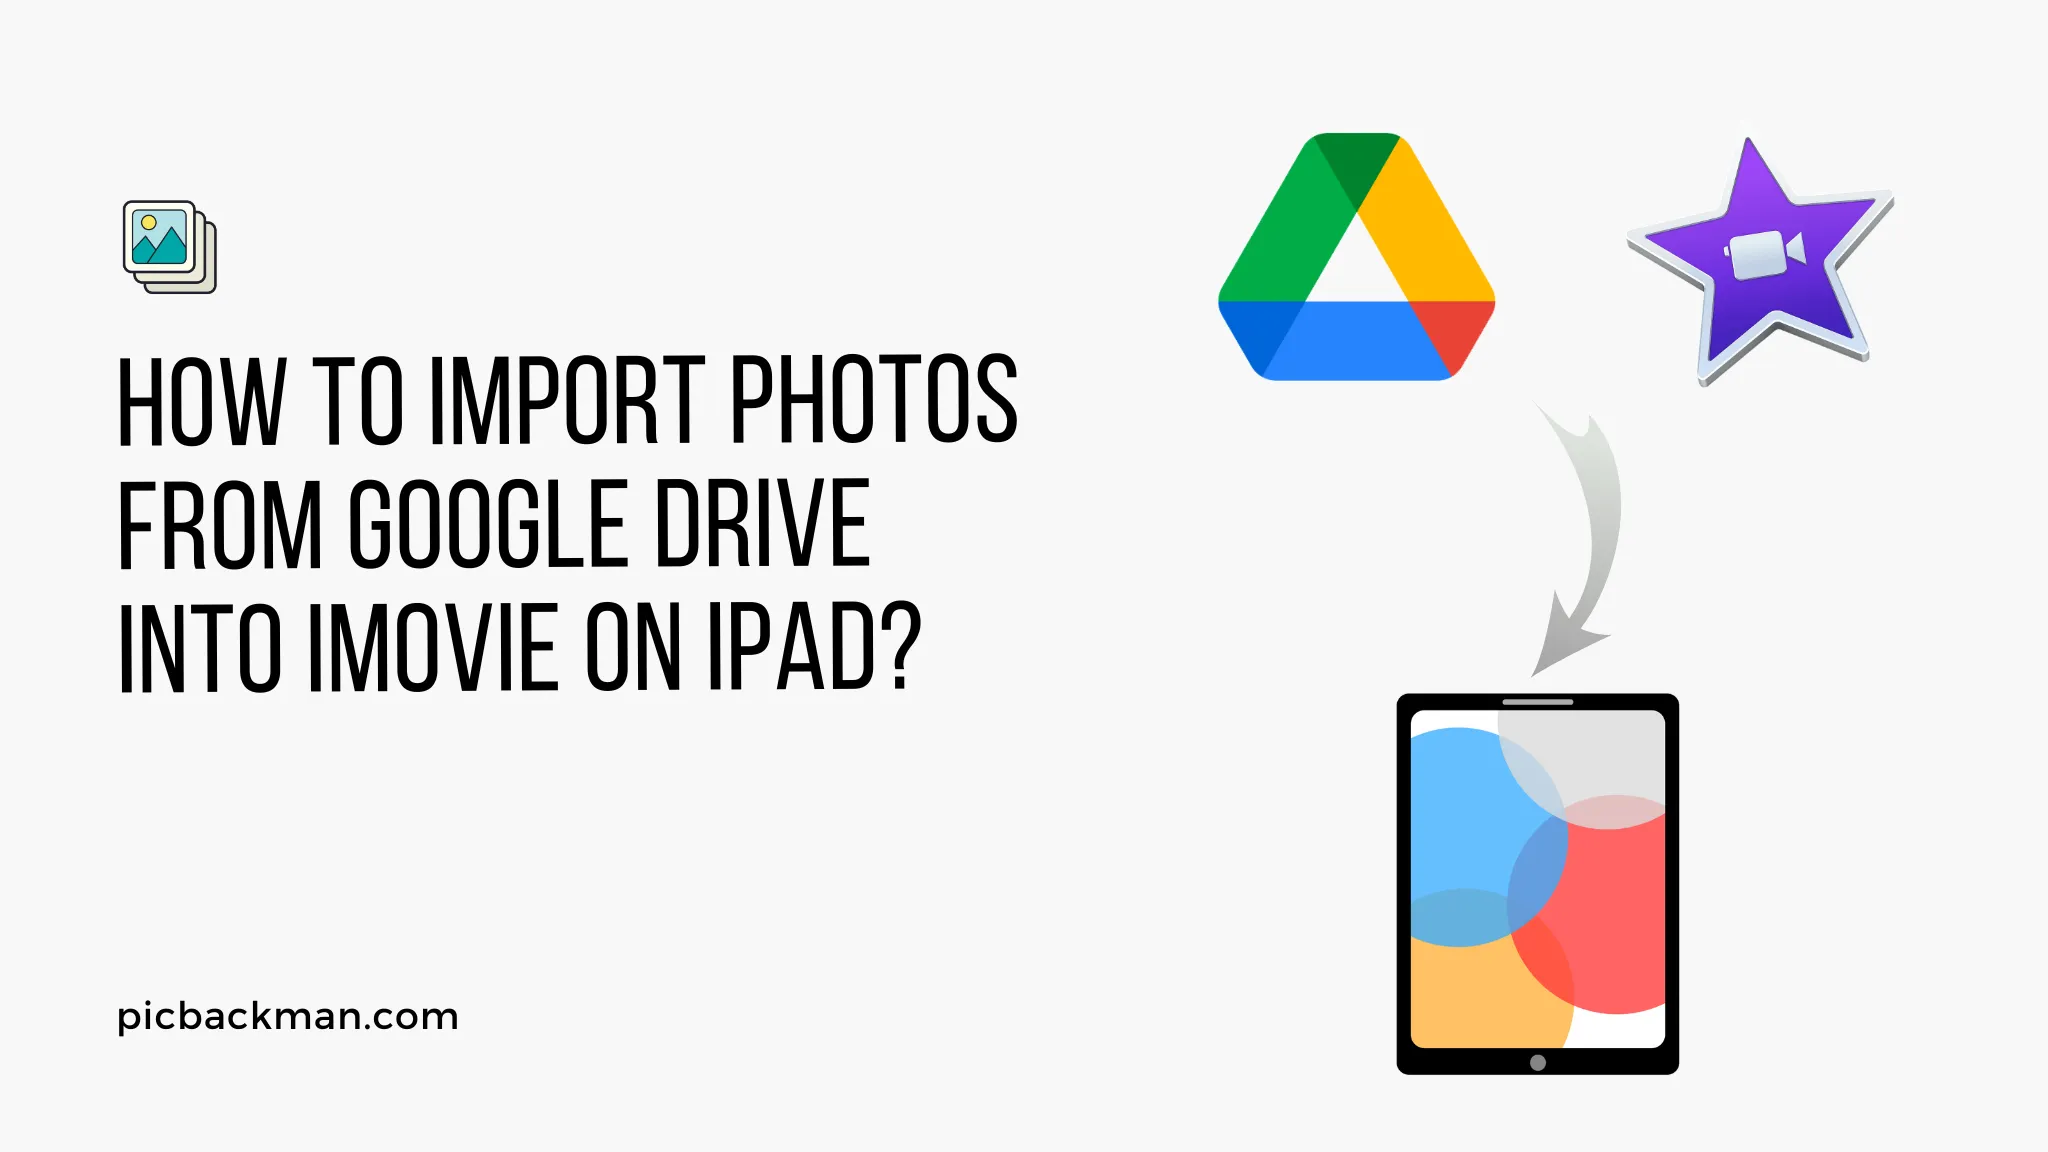 How to Import Photos from Google Drive into iMovie on iPad